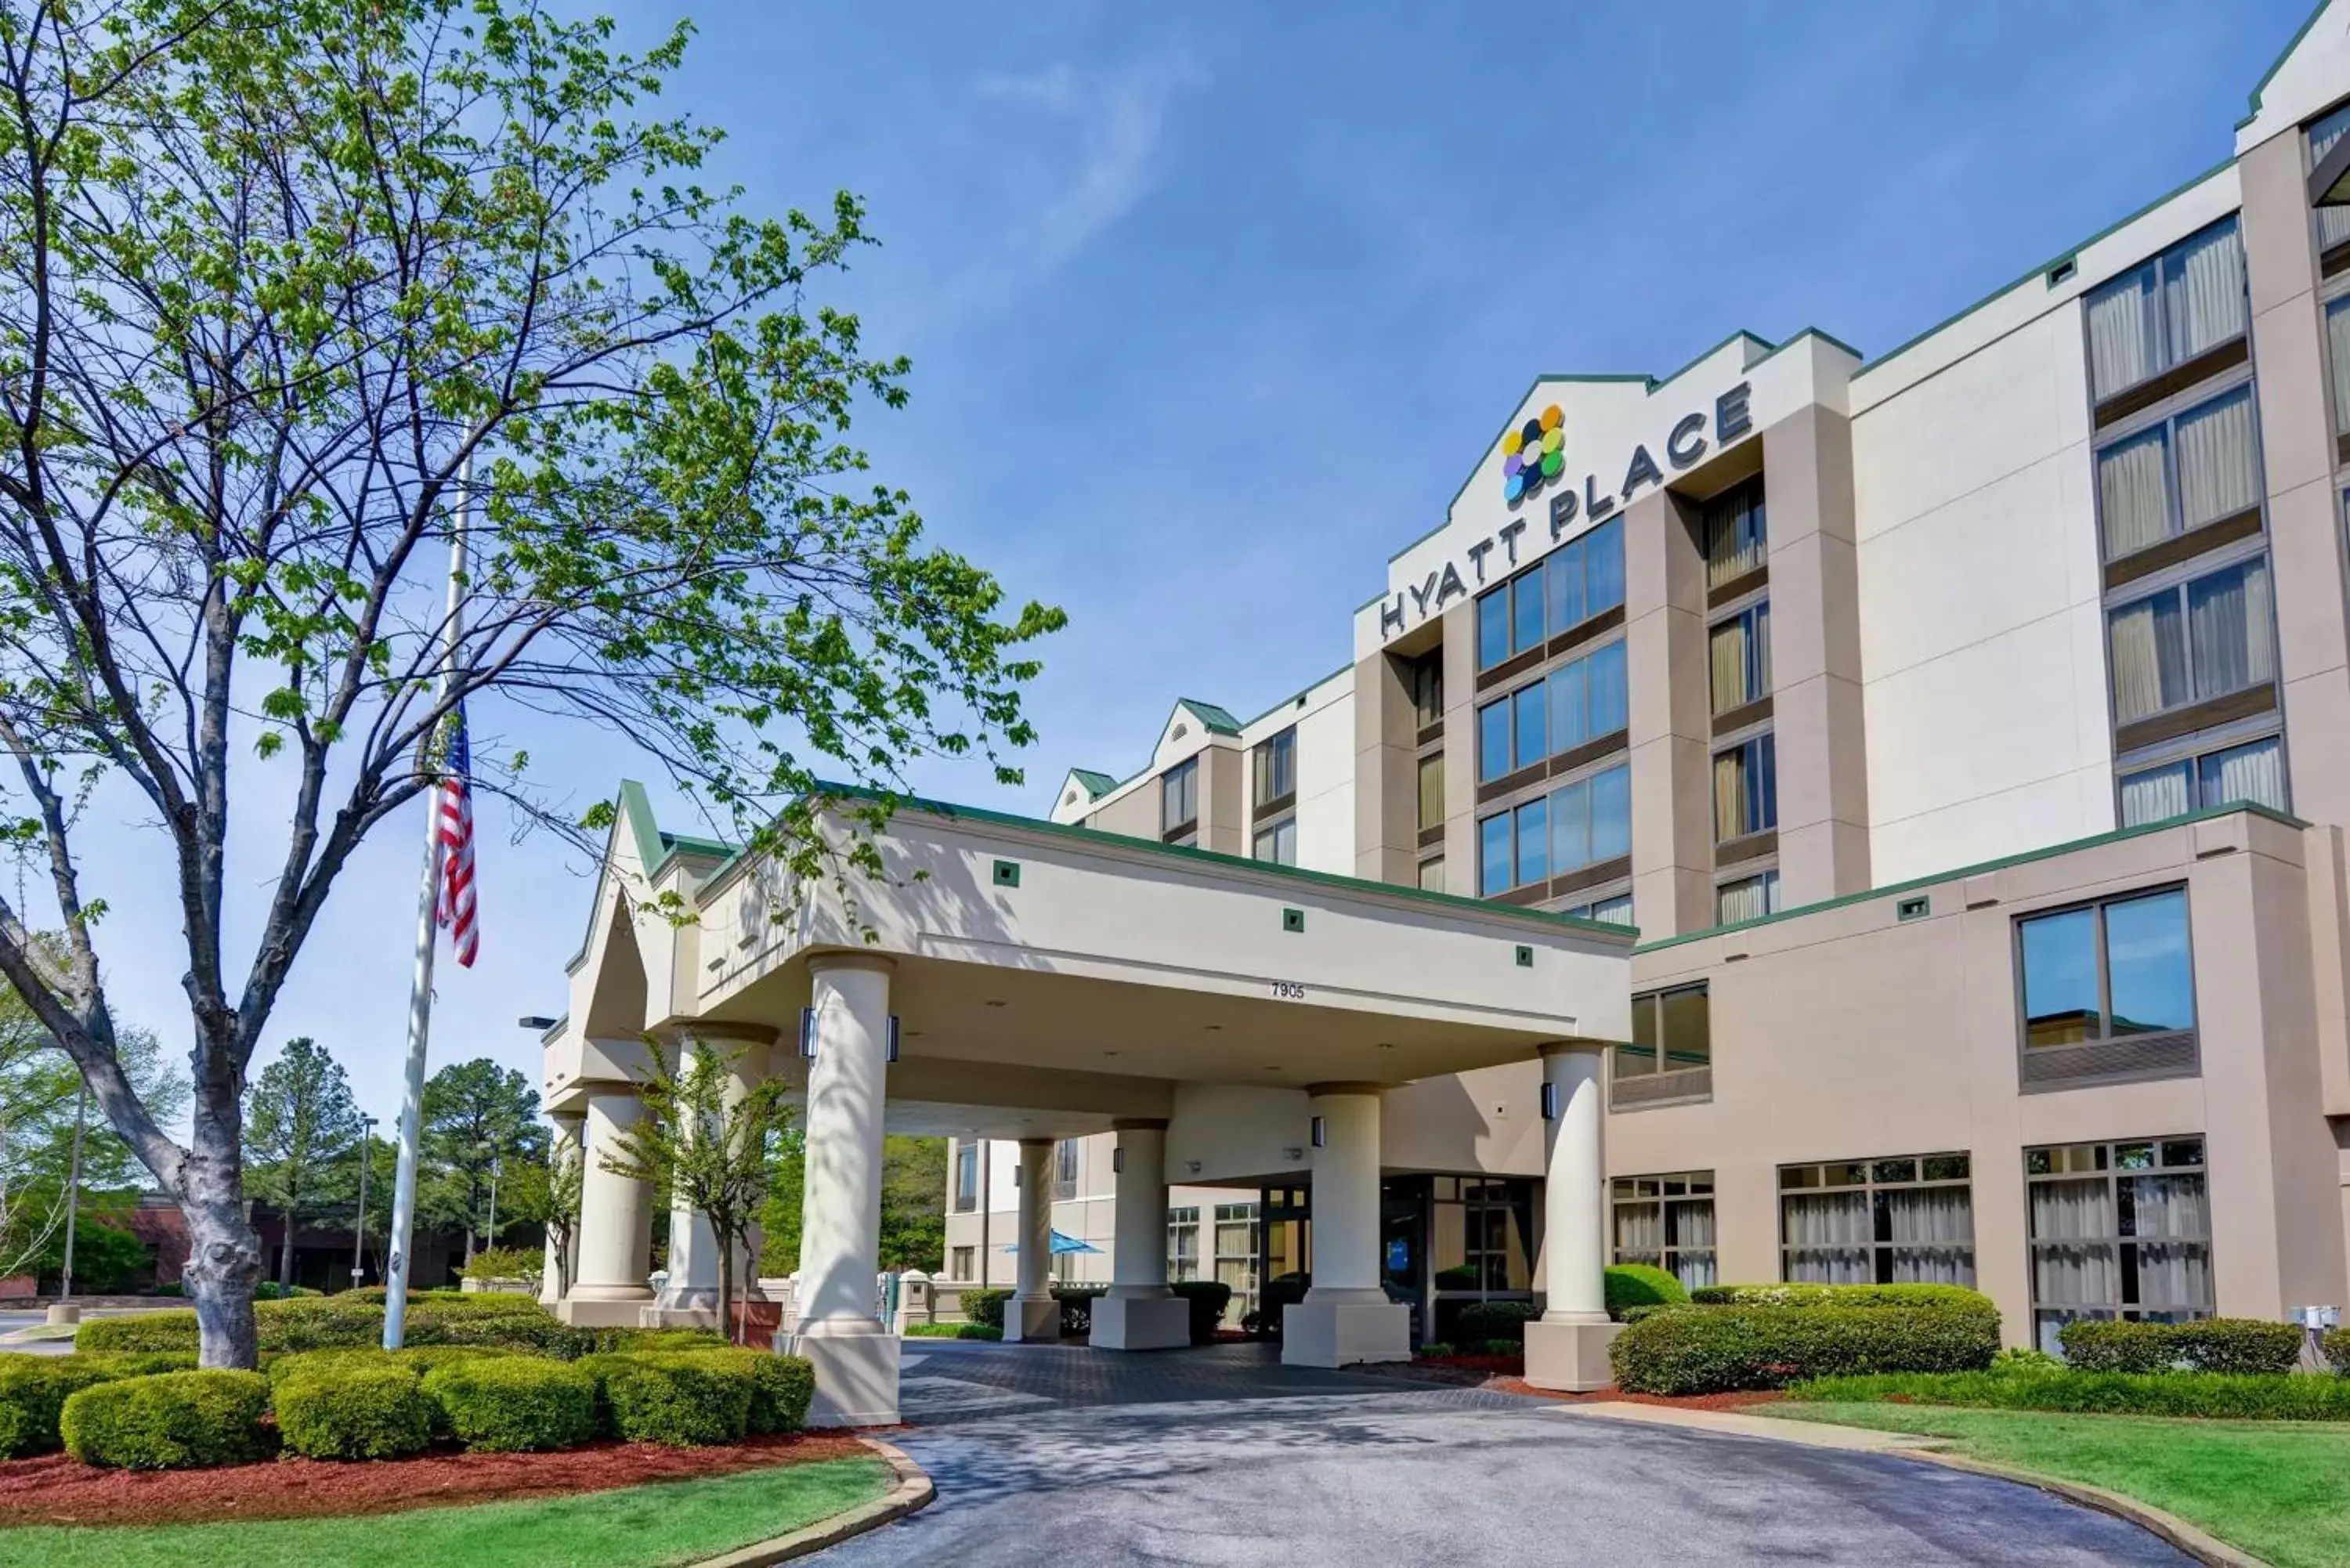 Property building in Hyatt Place Memphis Wolfchase